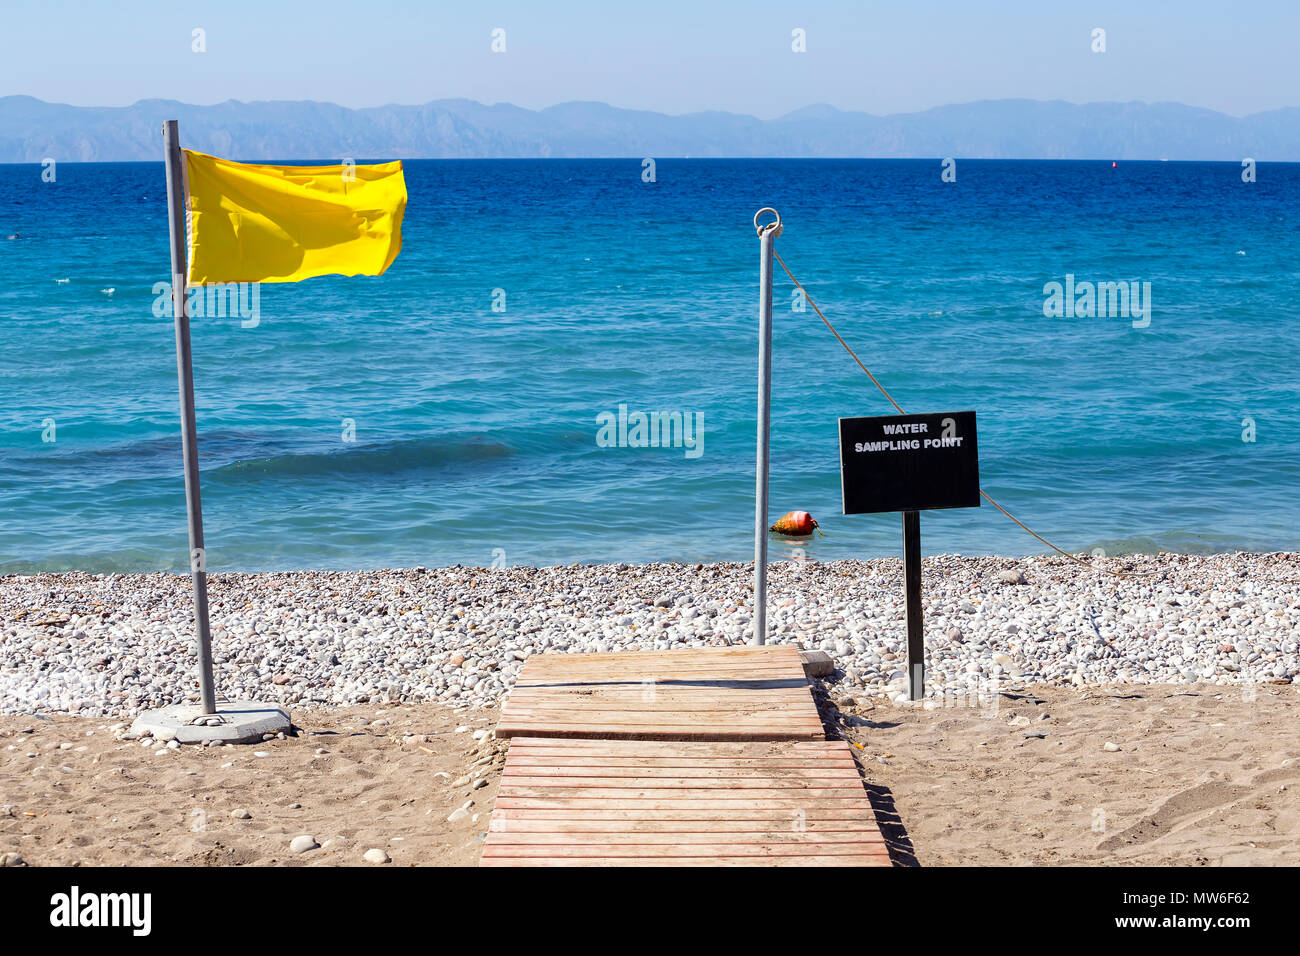 Water sampling point for blue flag beach, that a beach, marina or sustainable boating tourism operator meets its stringent standards. Stock Photo